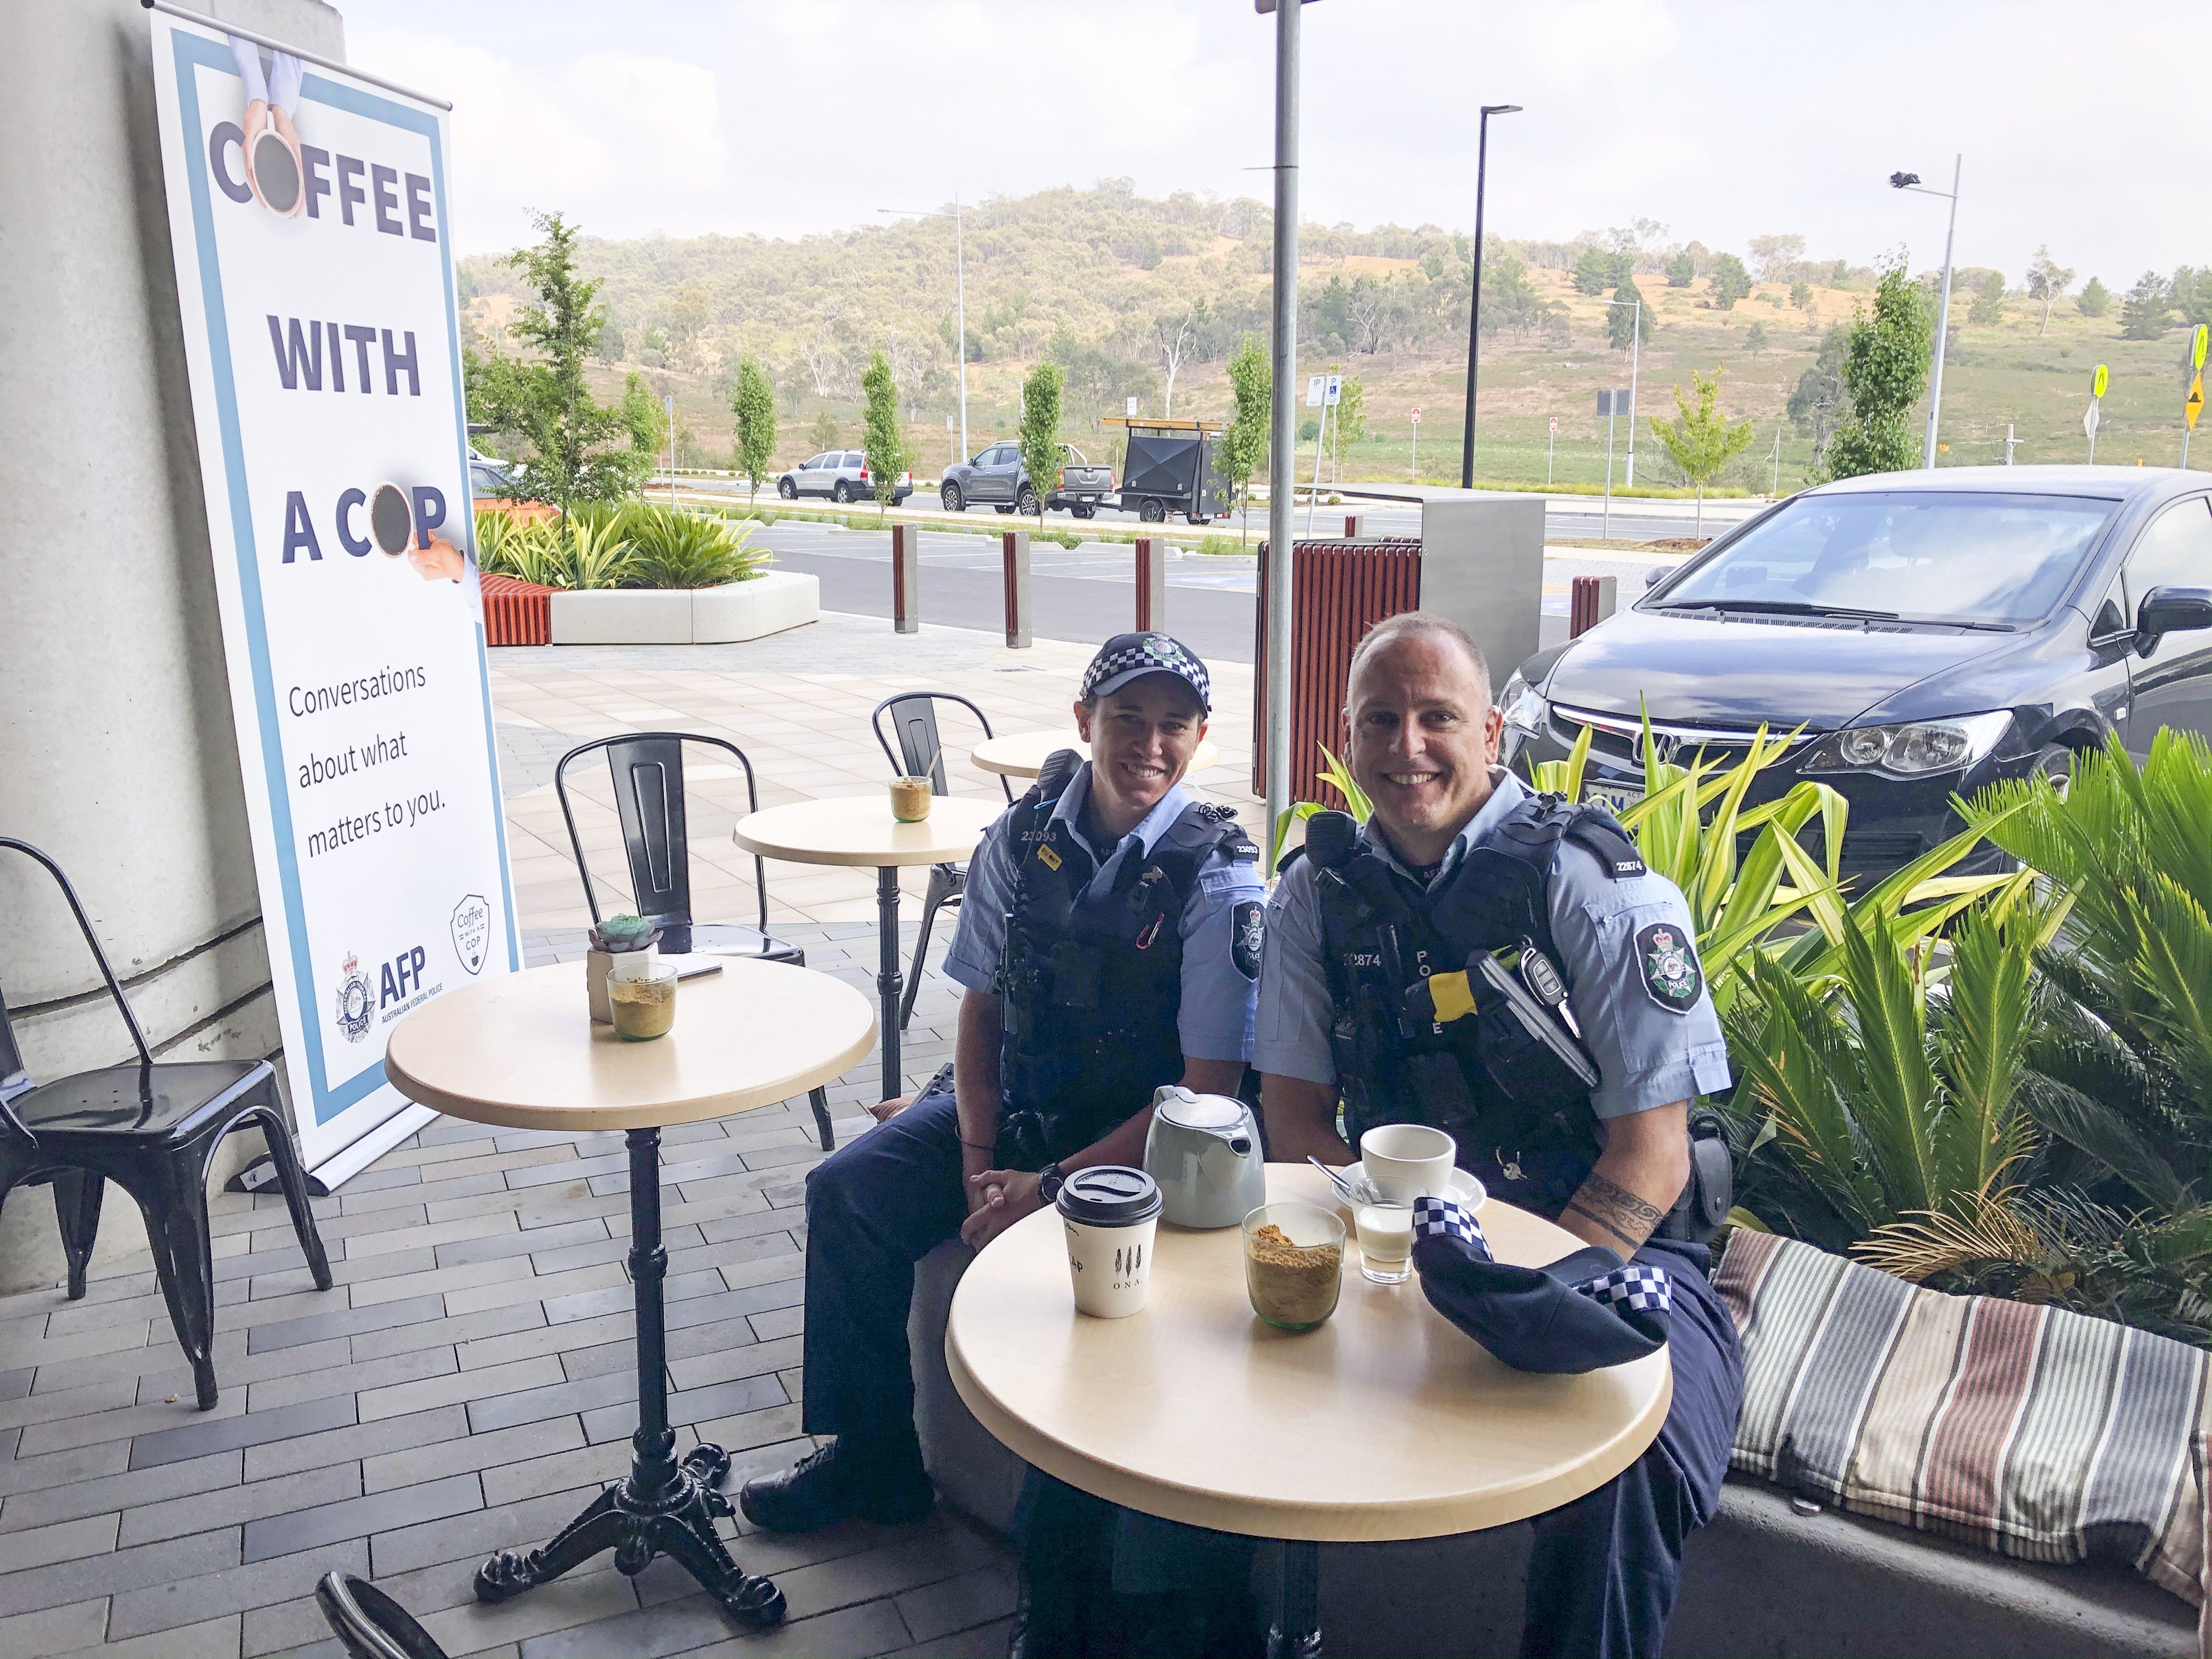 Coffee with a Cop initiative aims to build trust between Police and the public